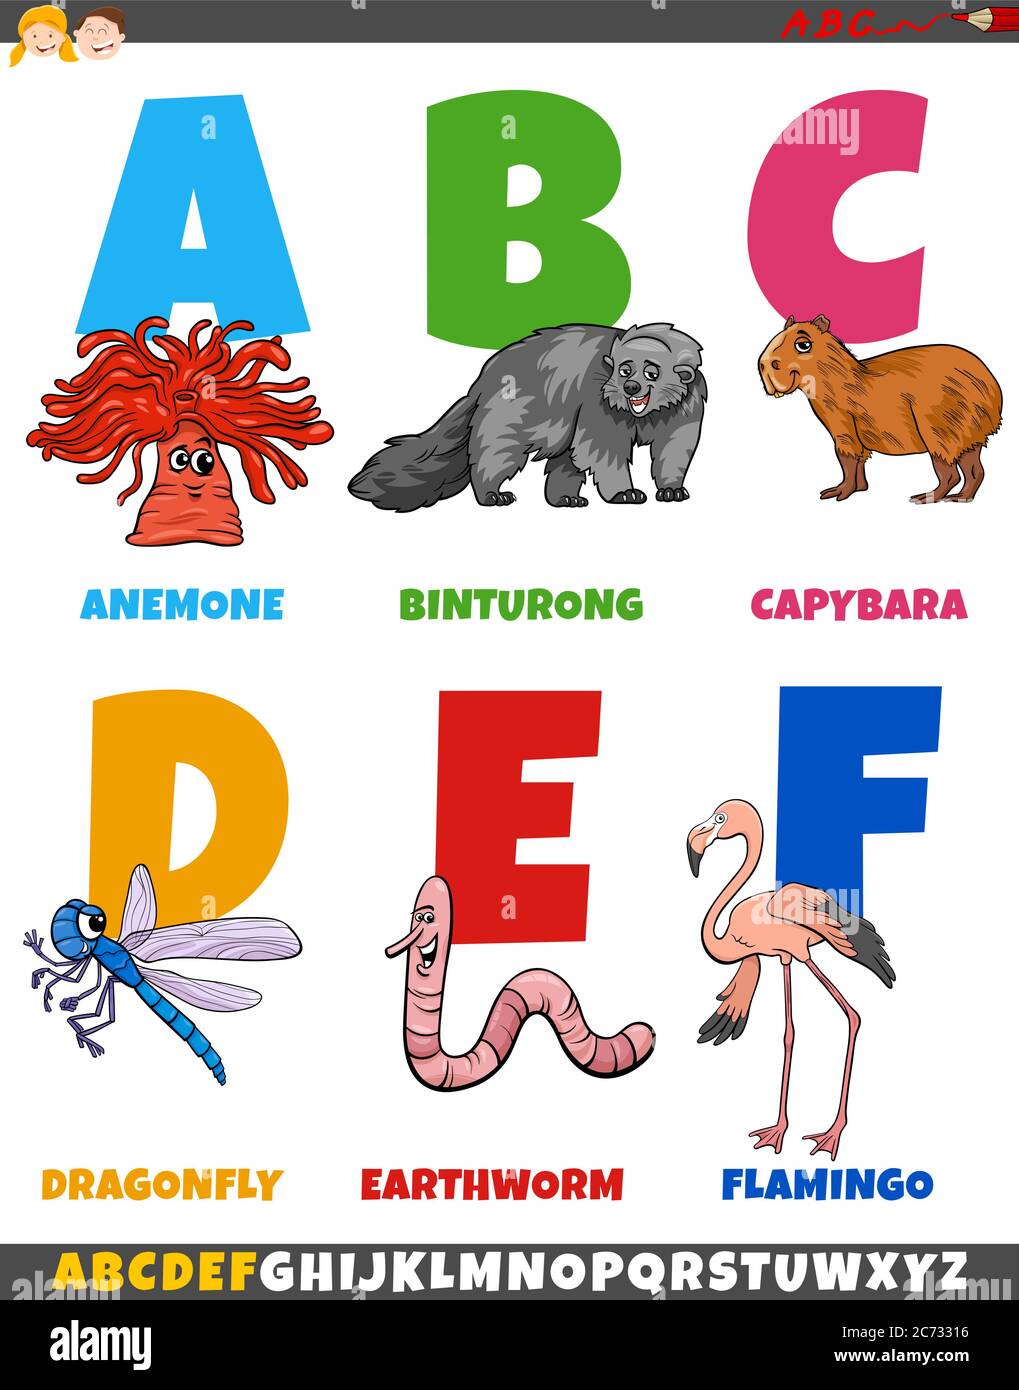 Cartoon Illustration of Educational Colorful Alphabet Set from Letter A to F with Comic Animal Characters Stock Vector